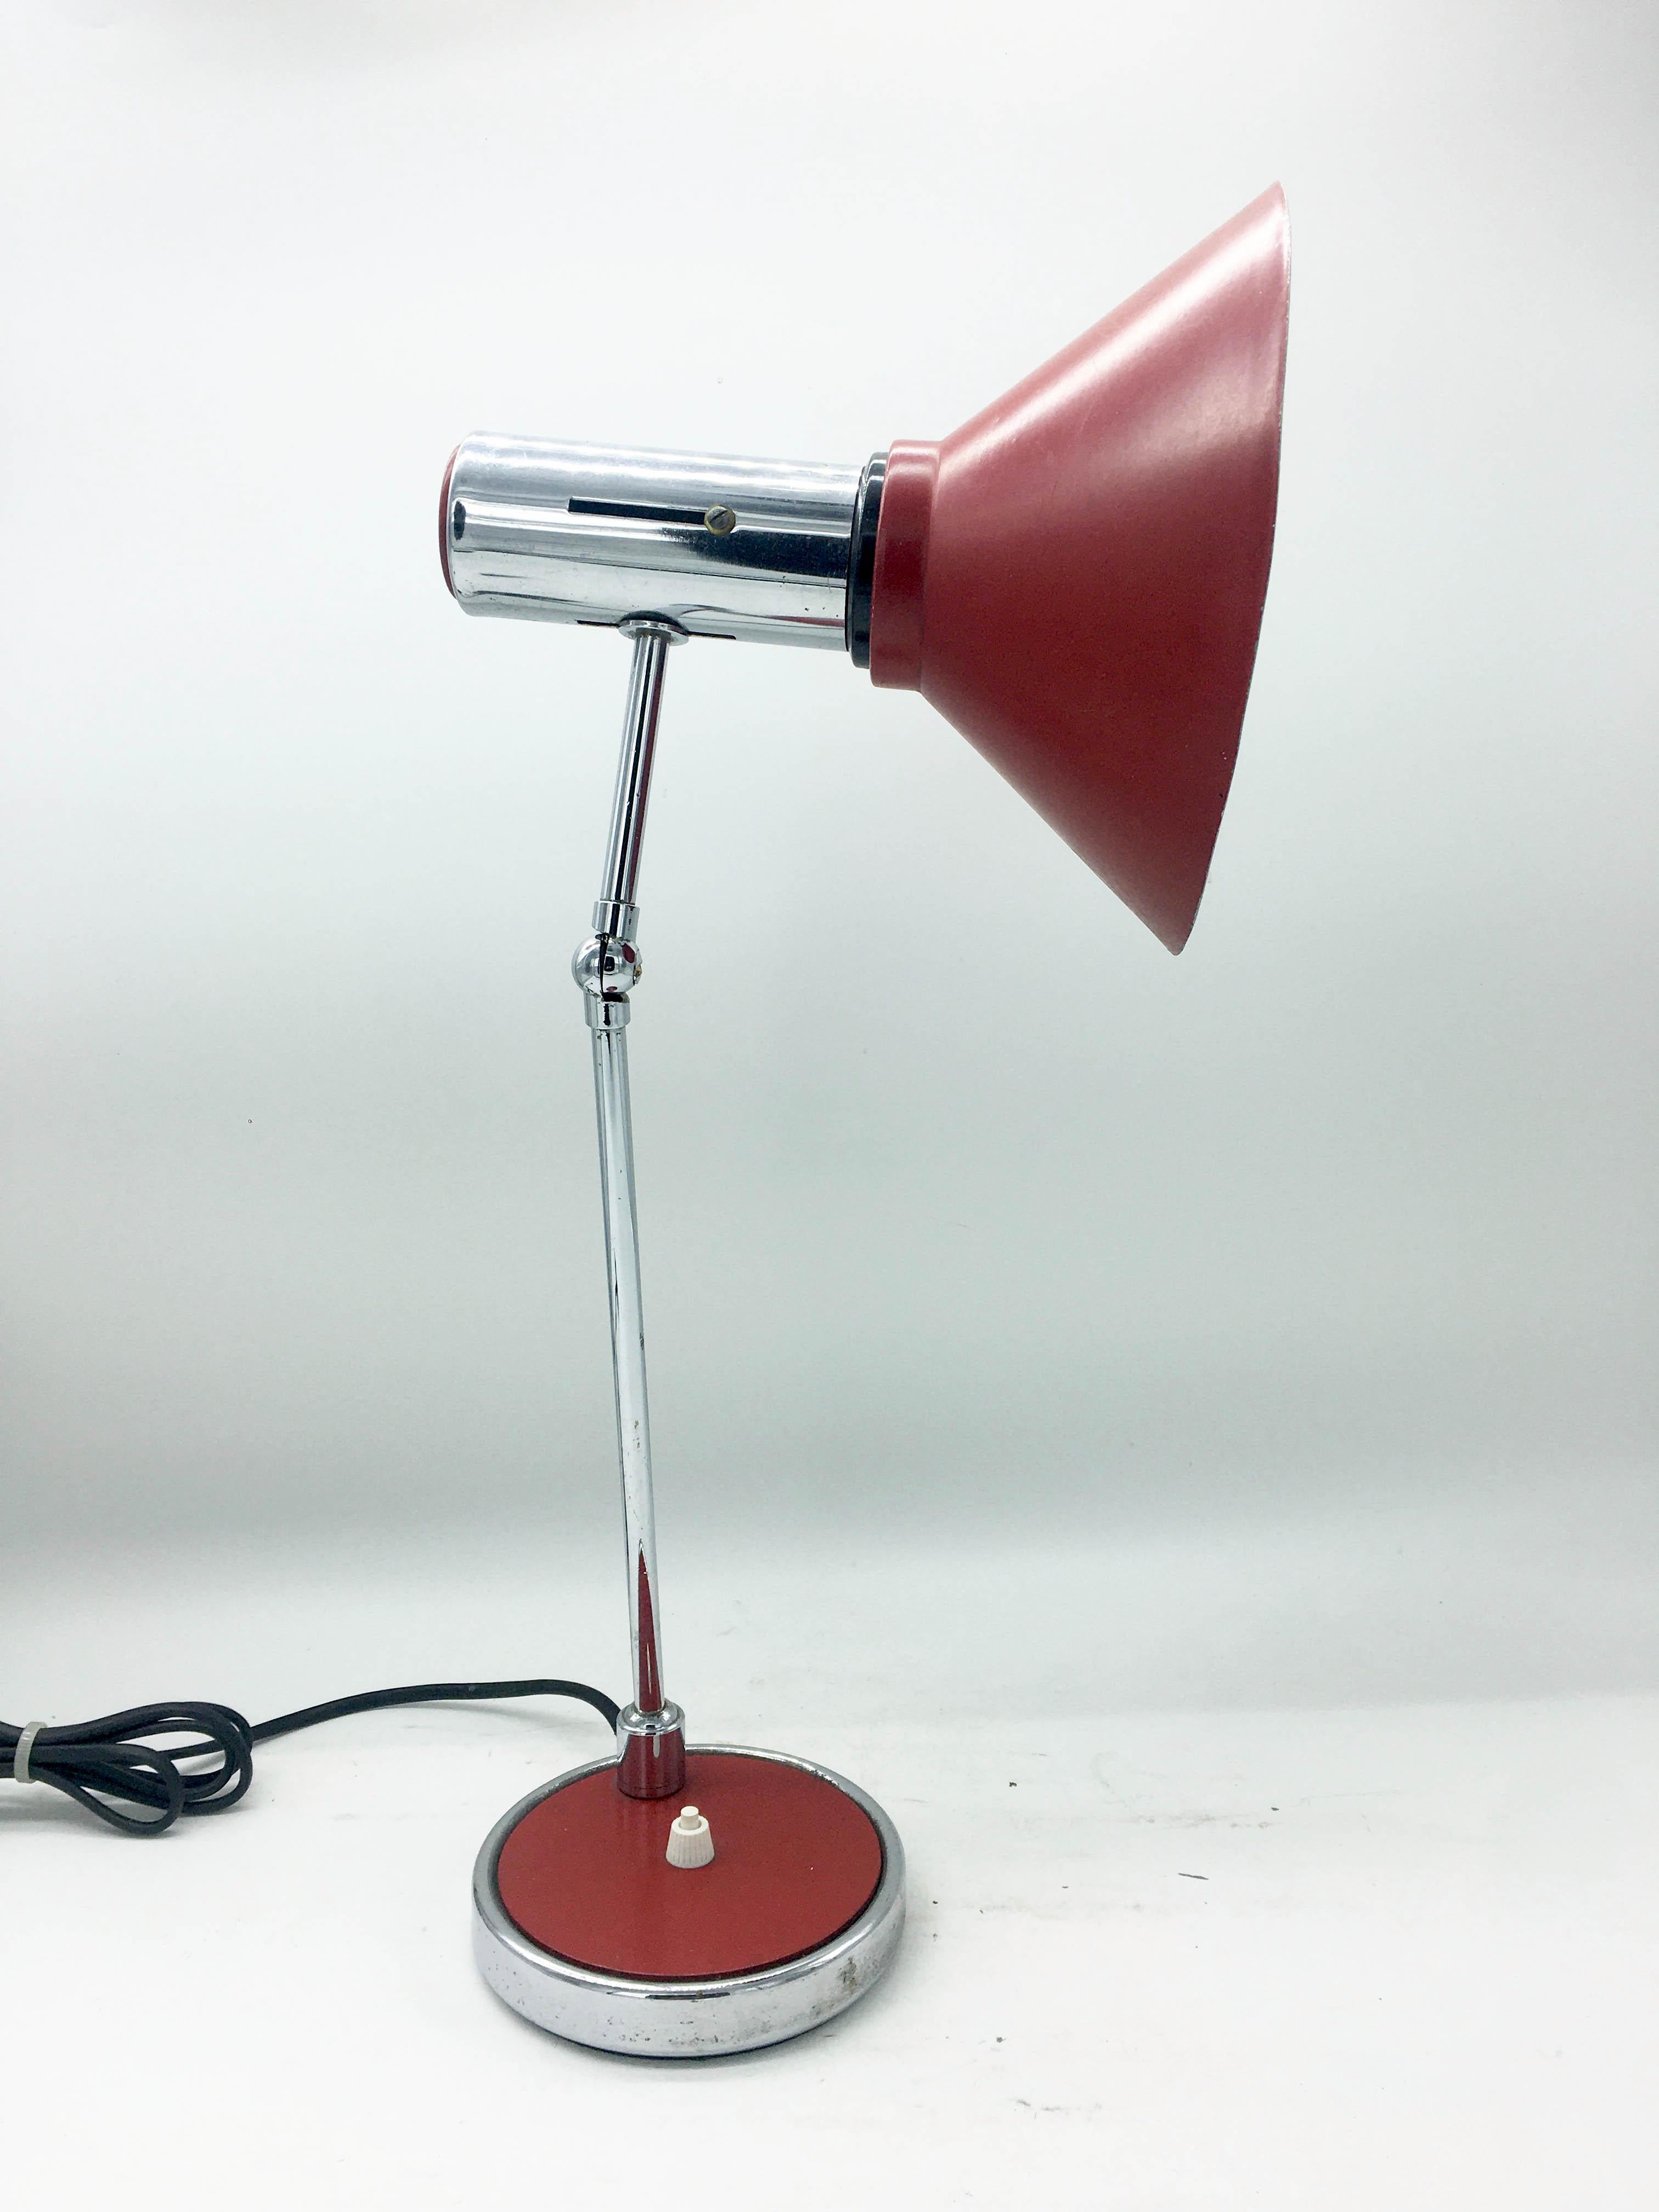 Delicious table lamp in red painted metal and chromed metal with adjustable arm, Stilux, made in Italy.